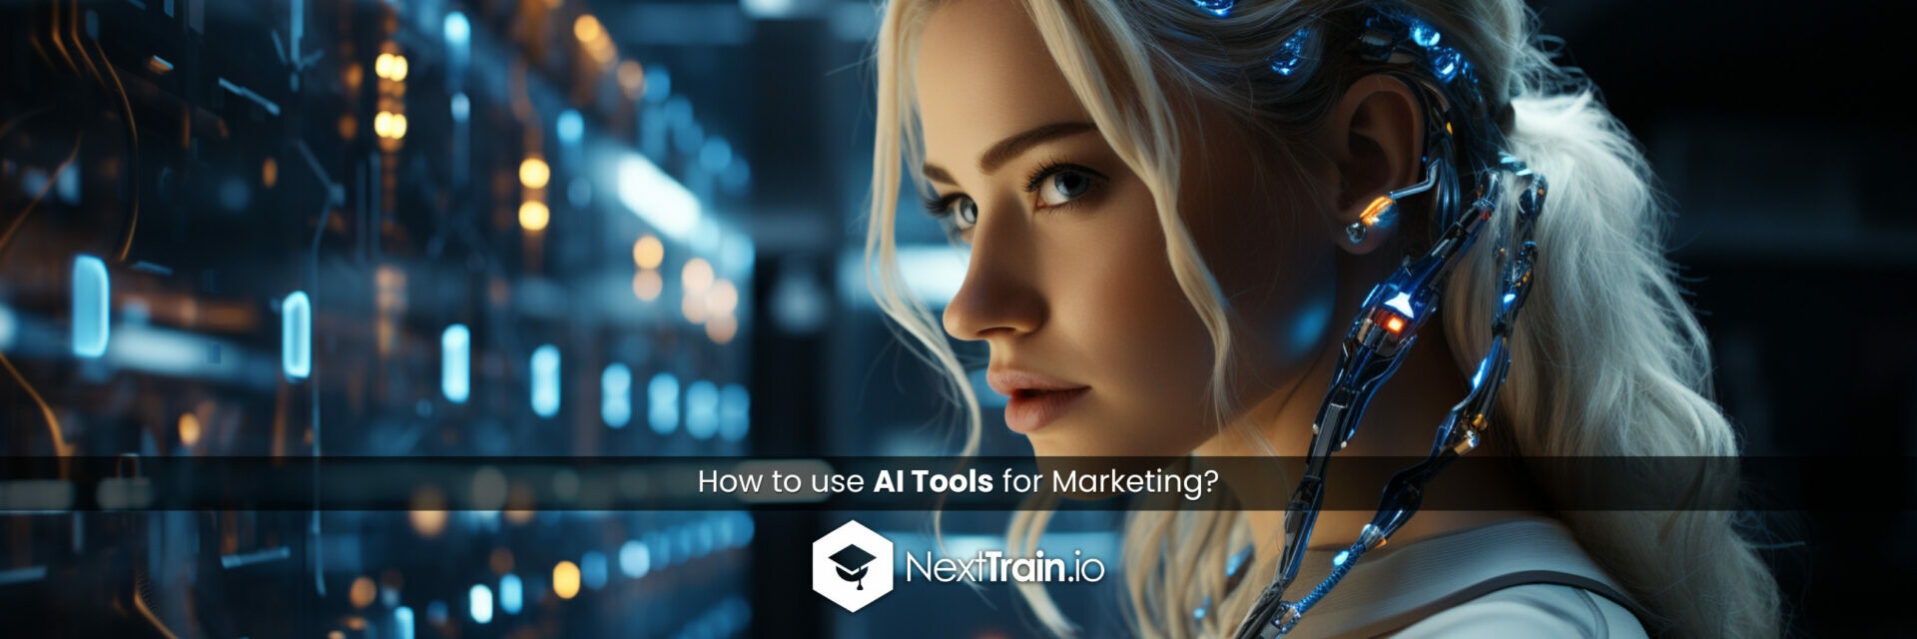 How to use AI Tools for Marketing?